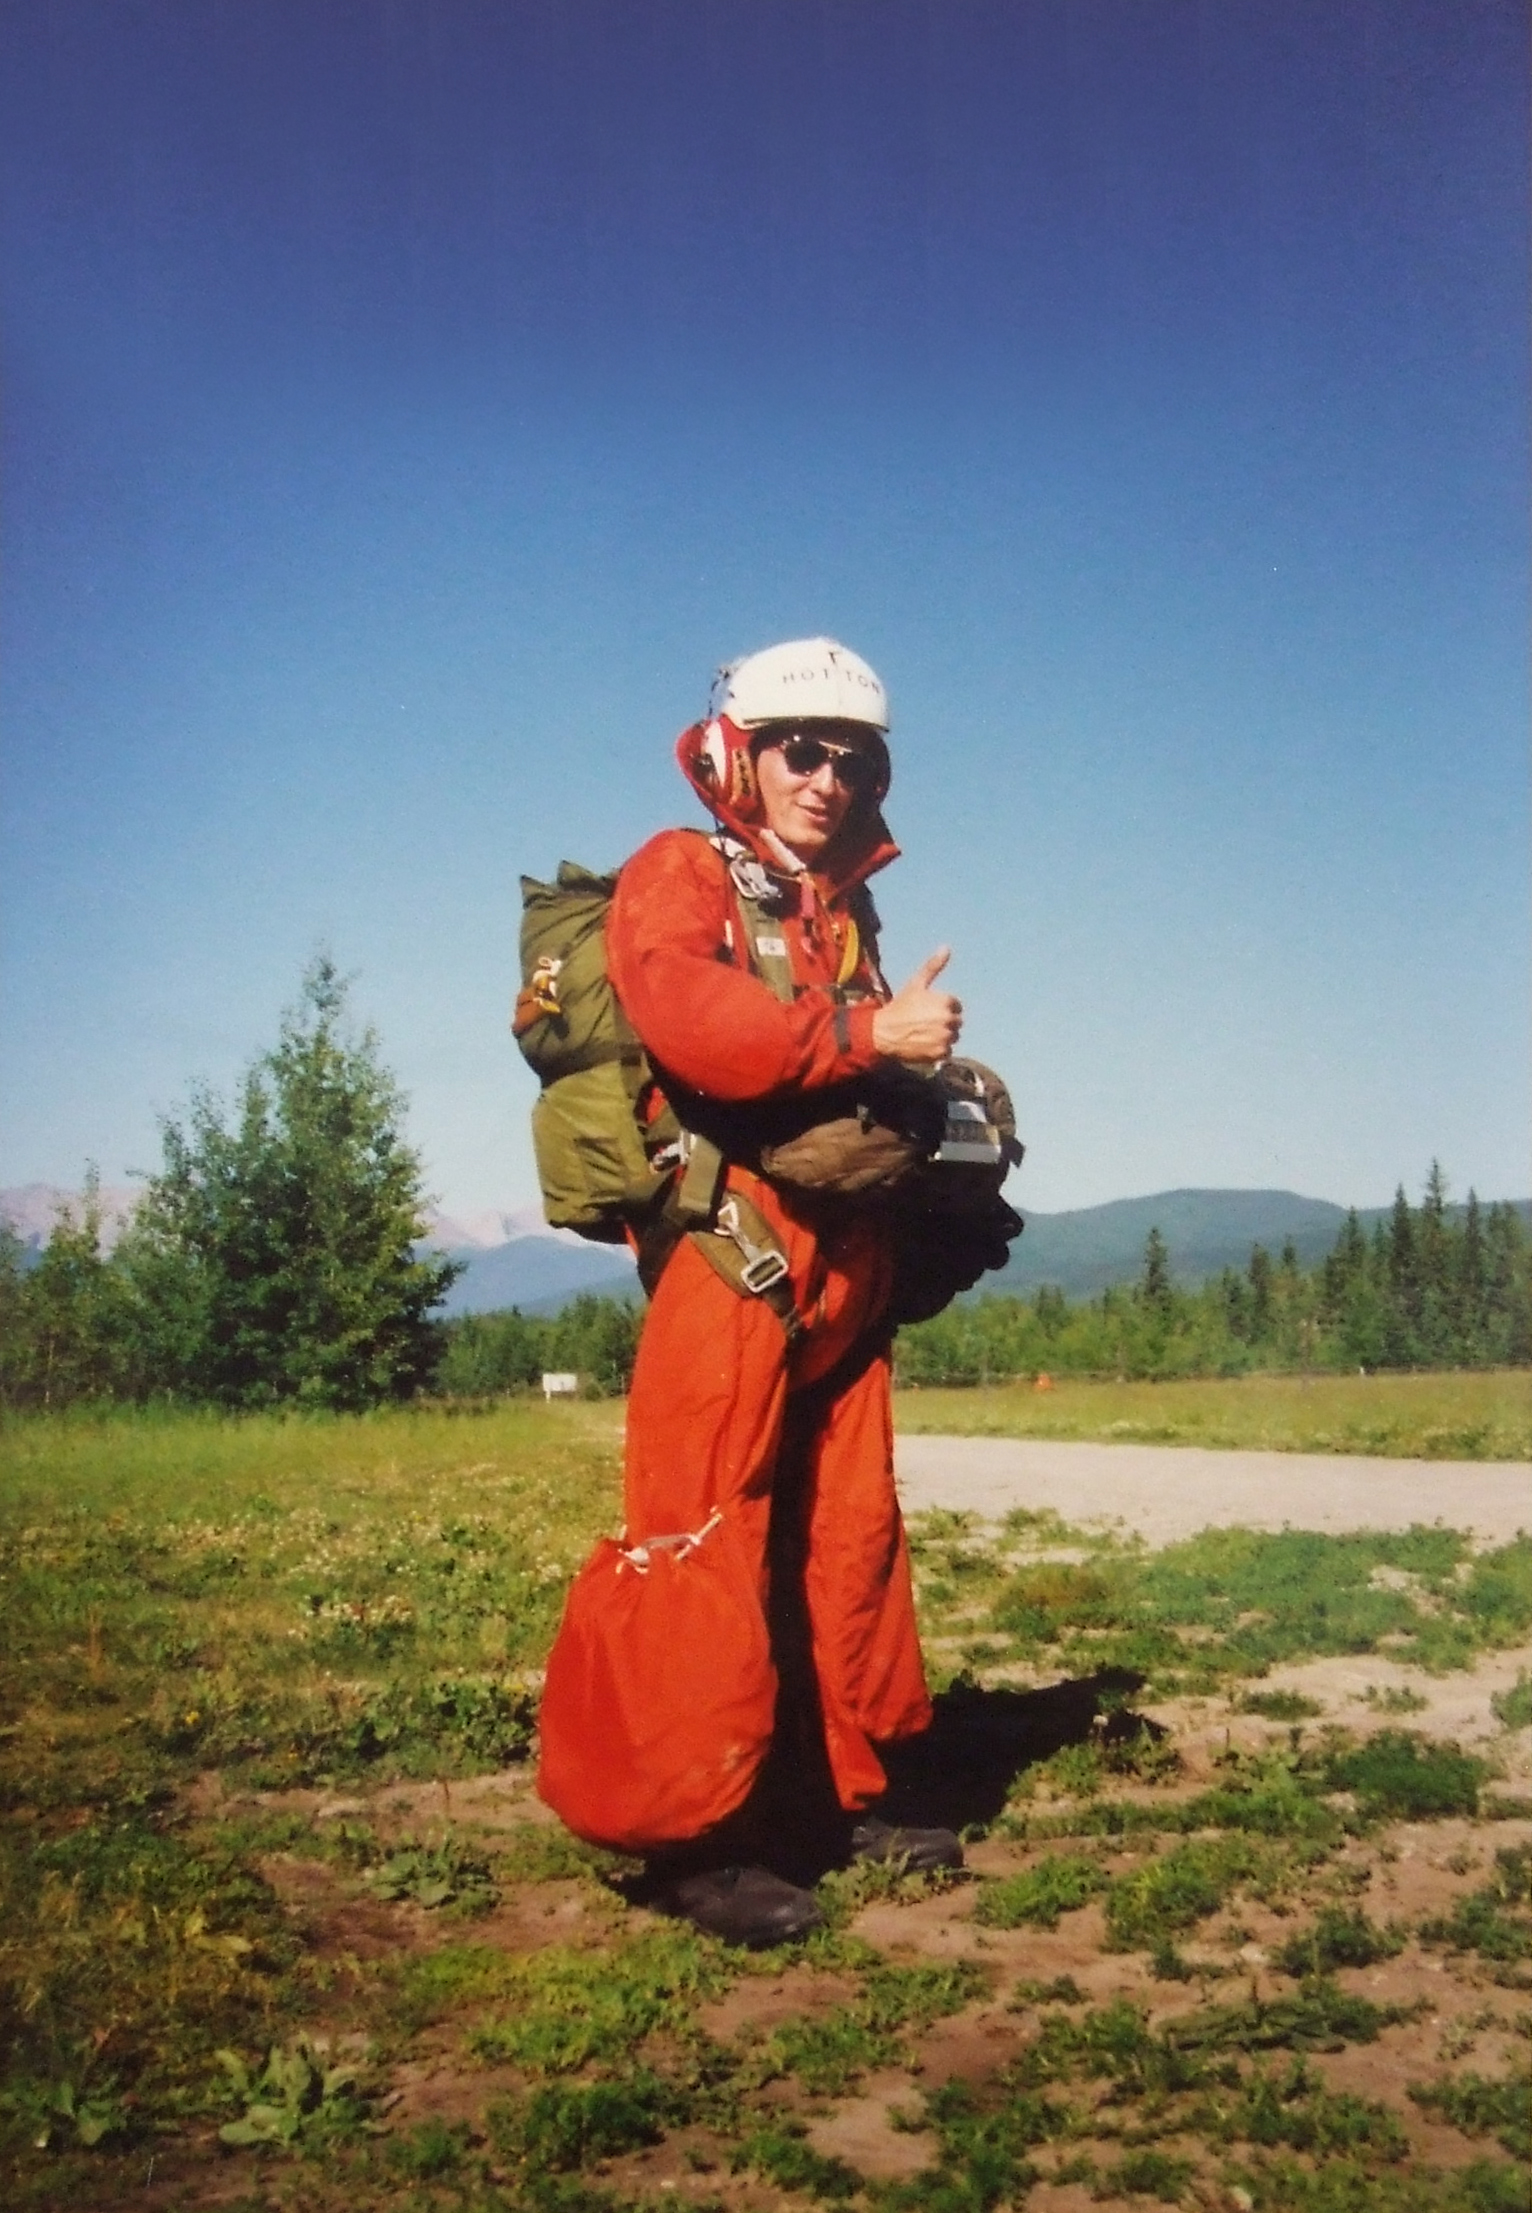 Ready for the final jump in July 1990 for his last search and rescue technician training exam, now-Sergeant André Hotton looks at his puffy-legged jumpsuit and grimaces: catching that material on a parachute cord on his first exercise jump, once posted to Edmonton, broke his leg mid-air. PHOTO: Submitted